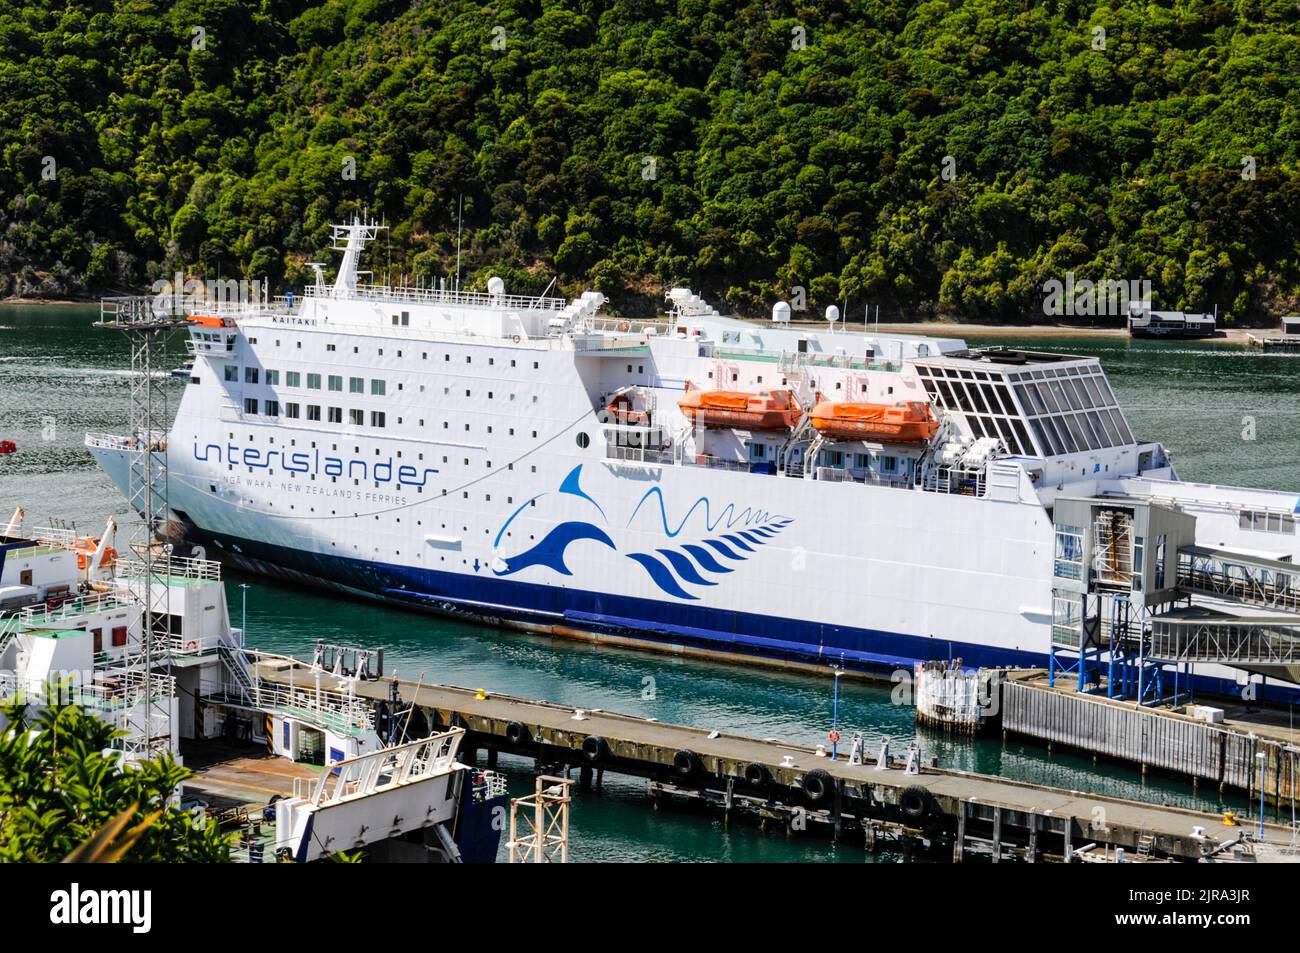 The Interislander Cook Strait ferry at the Picton passenger/car ferry terminal at the Pictor ferry port on South Island in New Zealand.  Picton serves Stock Photo